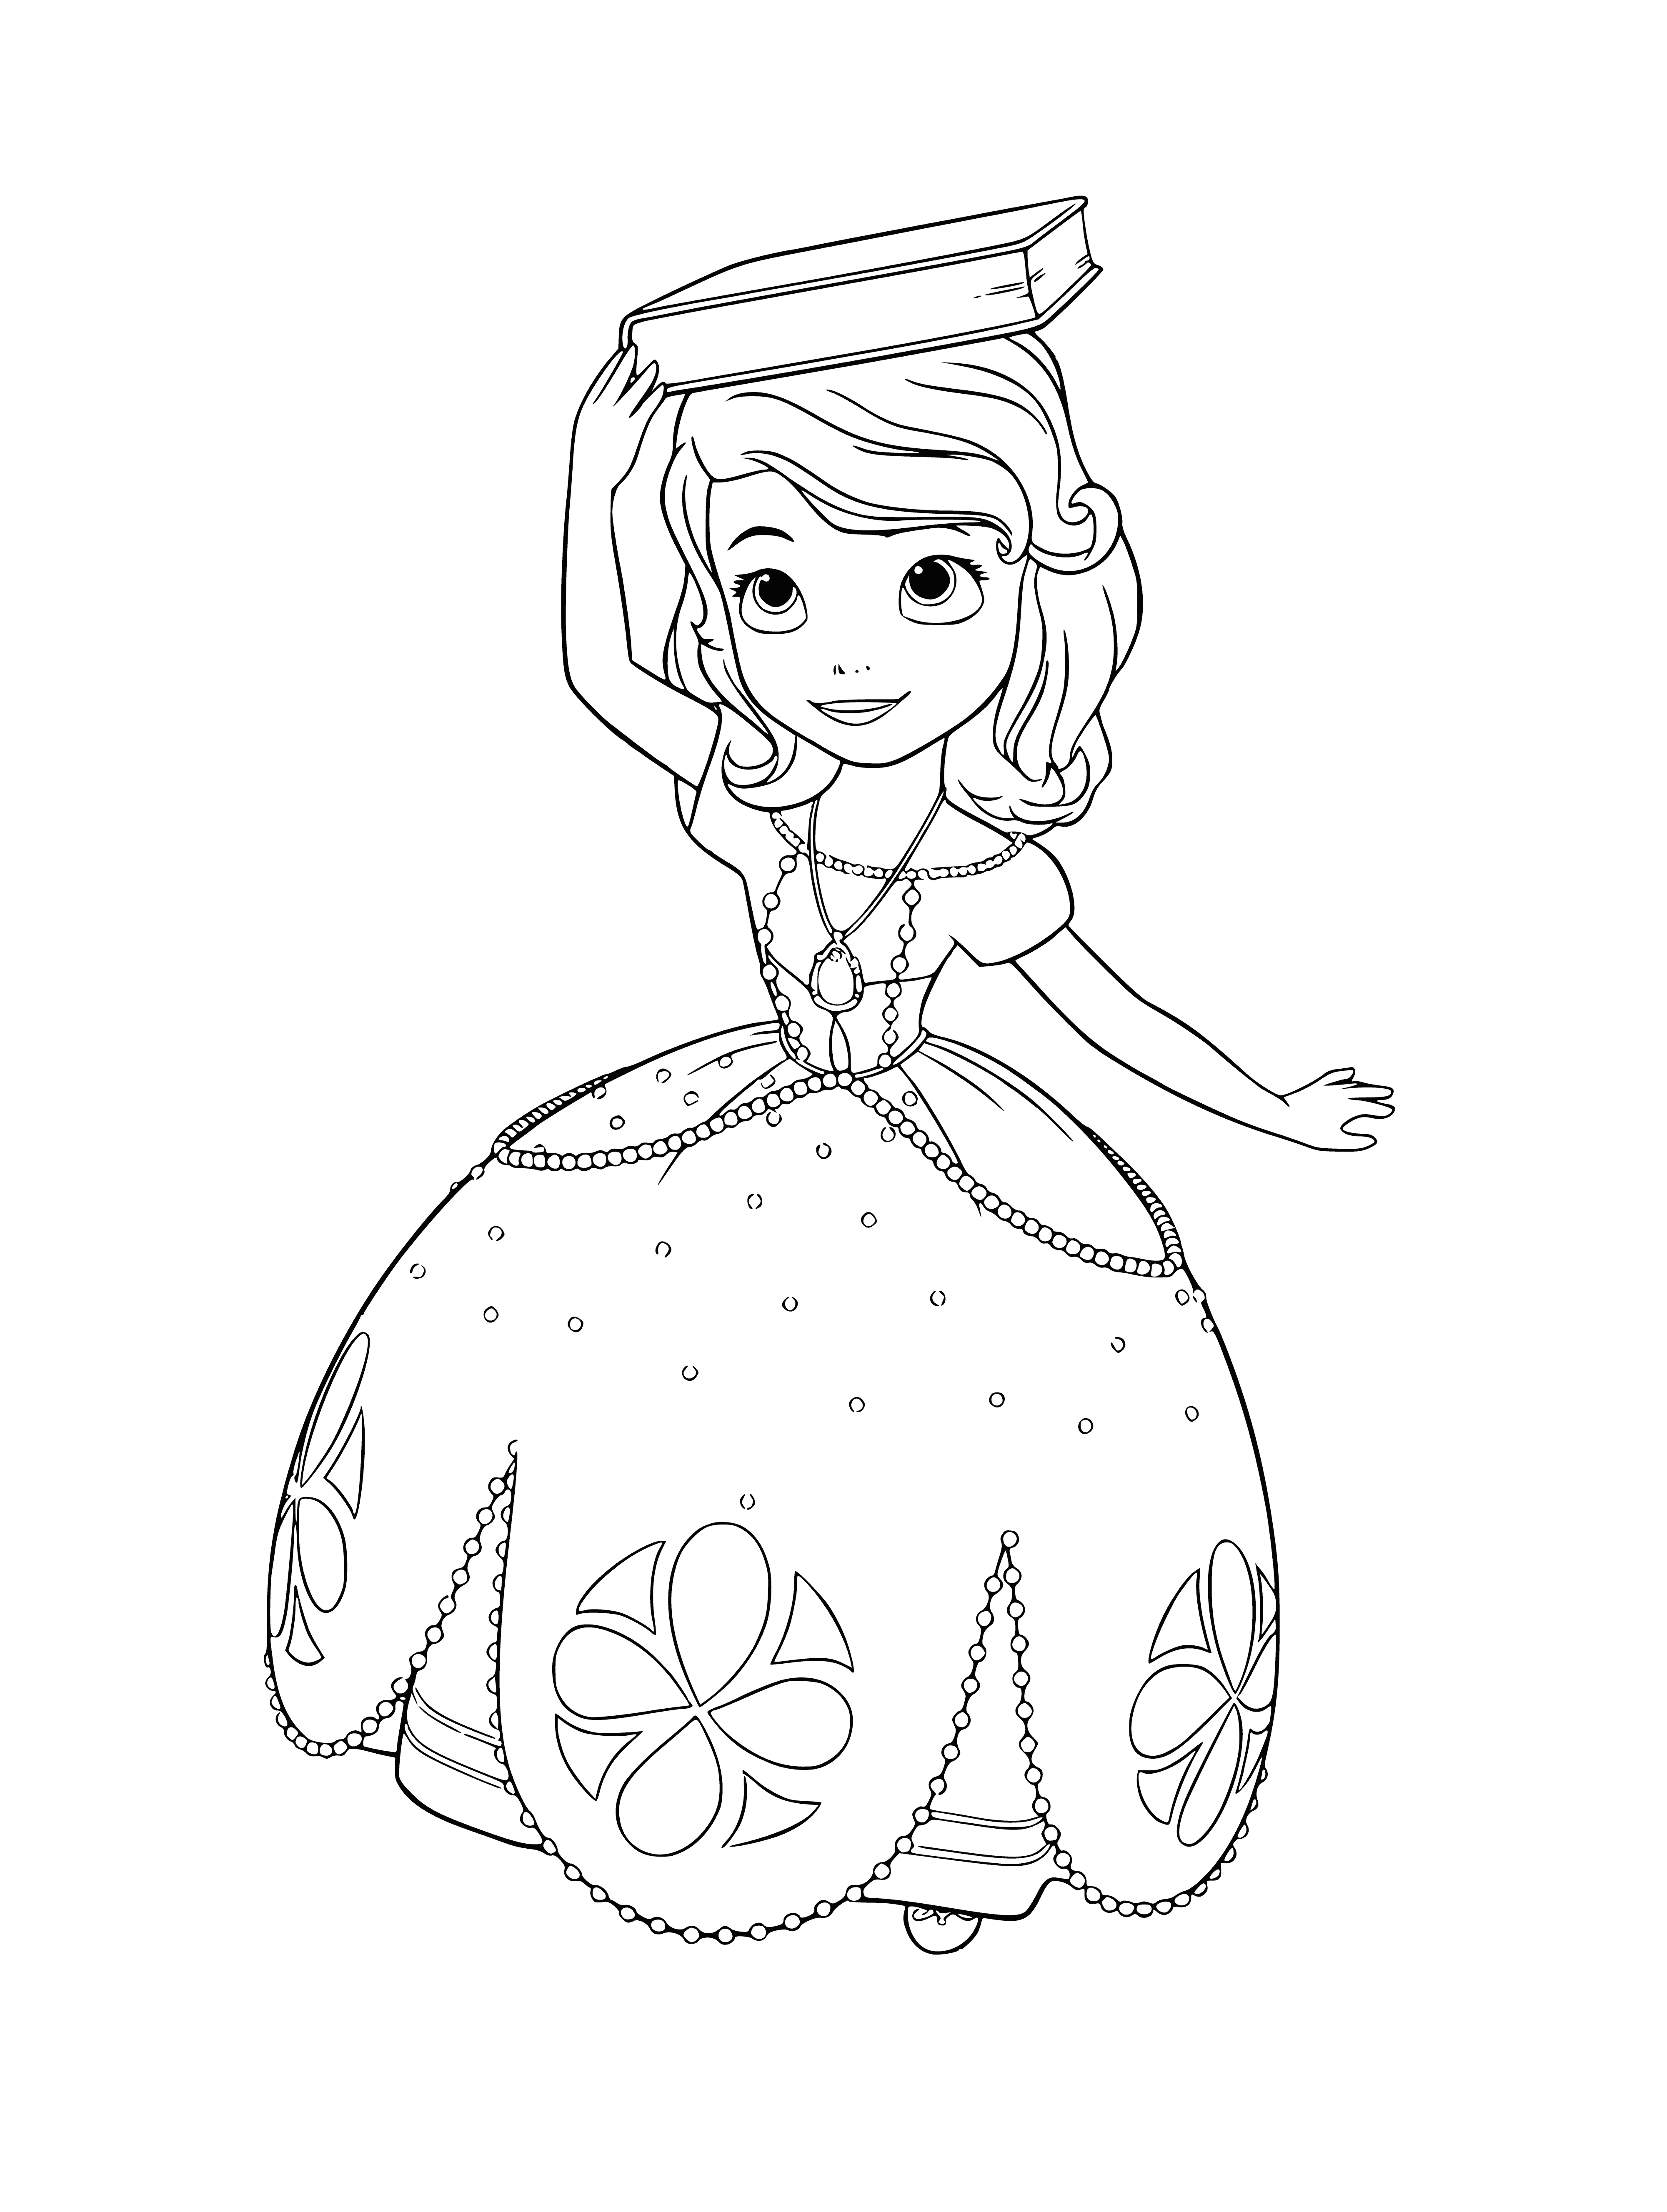 Princess Sofia with a book coloring page